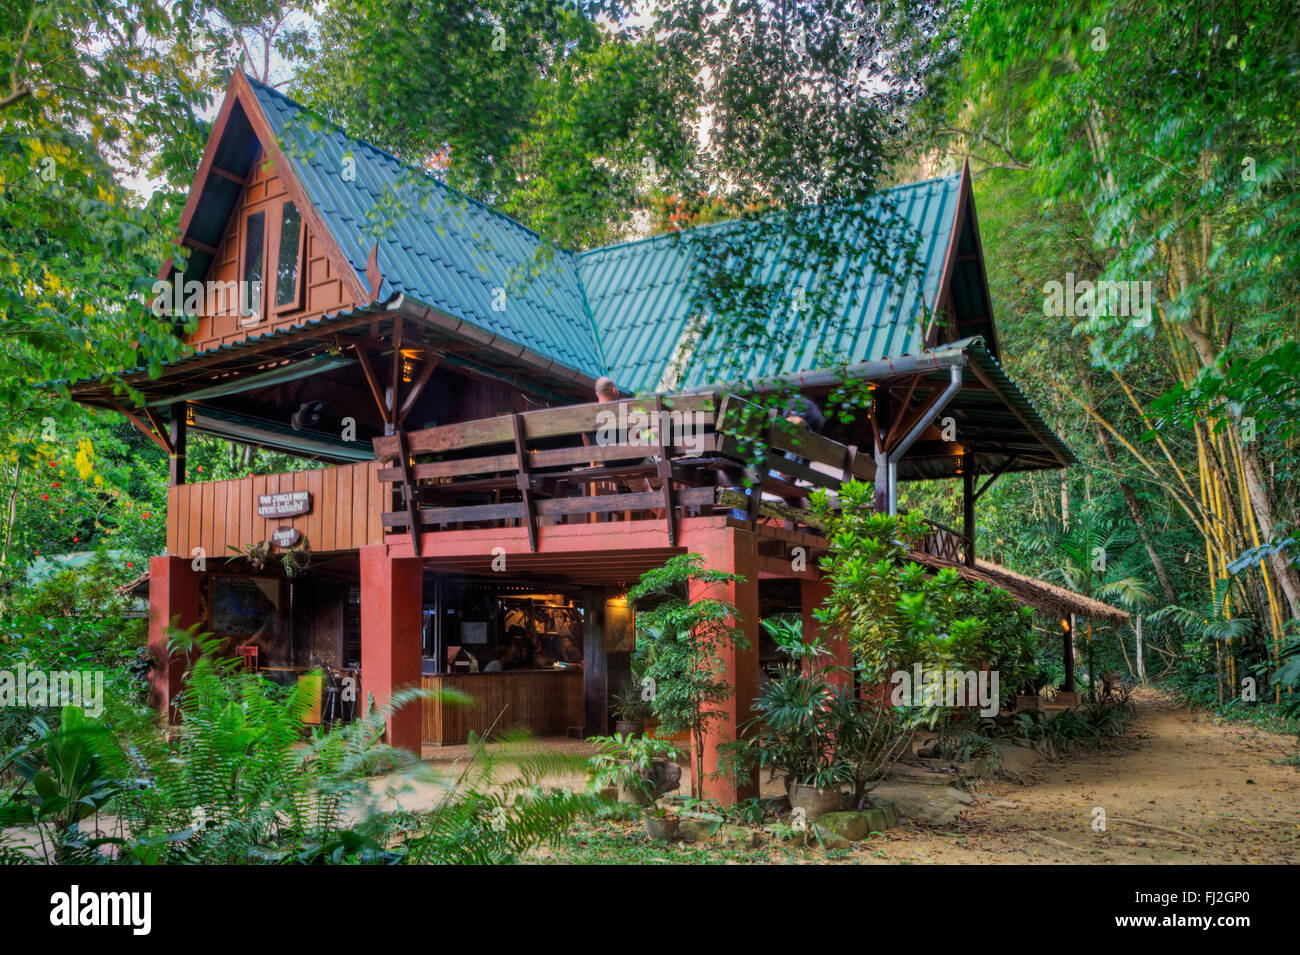 The main LODGE at OUR JUNGLE HOUSE nestled in the rainforest near KHAO SOK NATIONAL PARK - SURATHANI PROVENCE, THAILAND Stock Photo